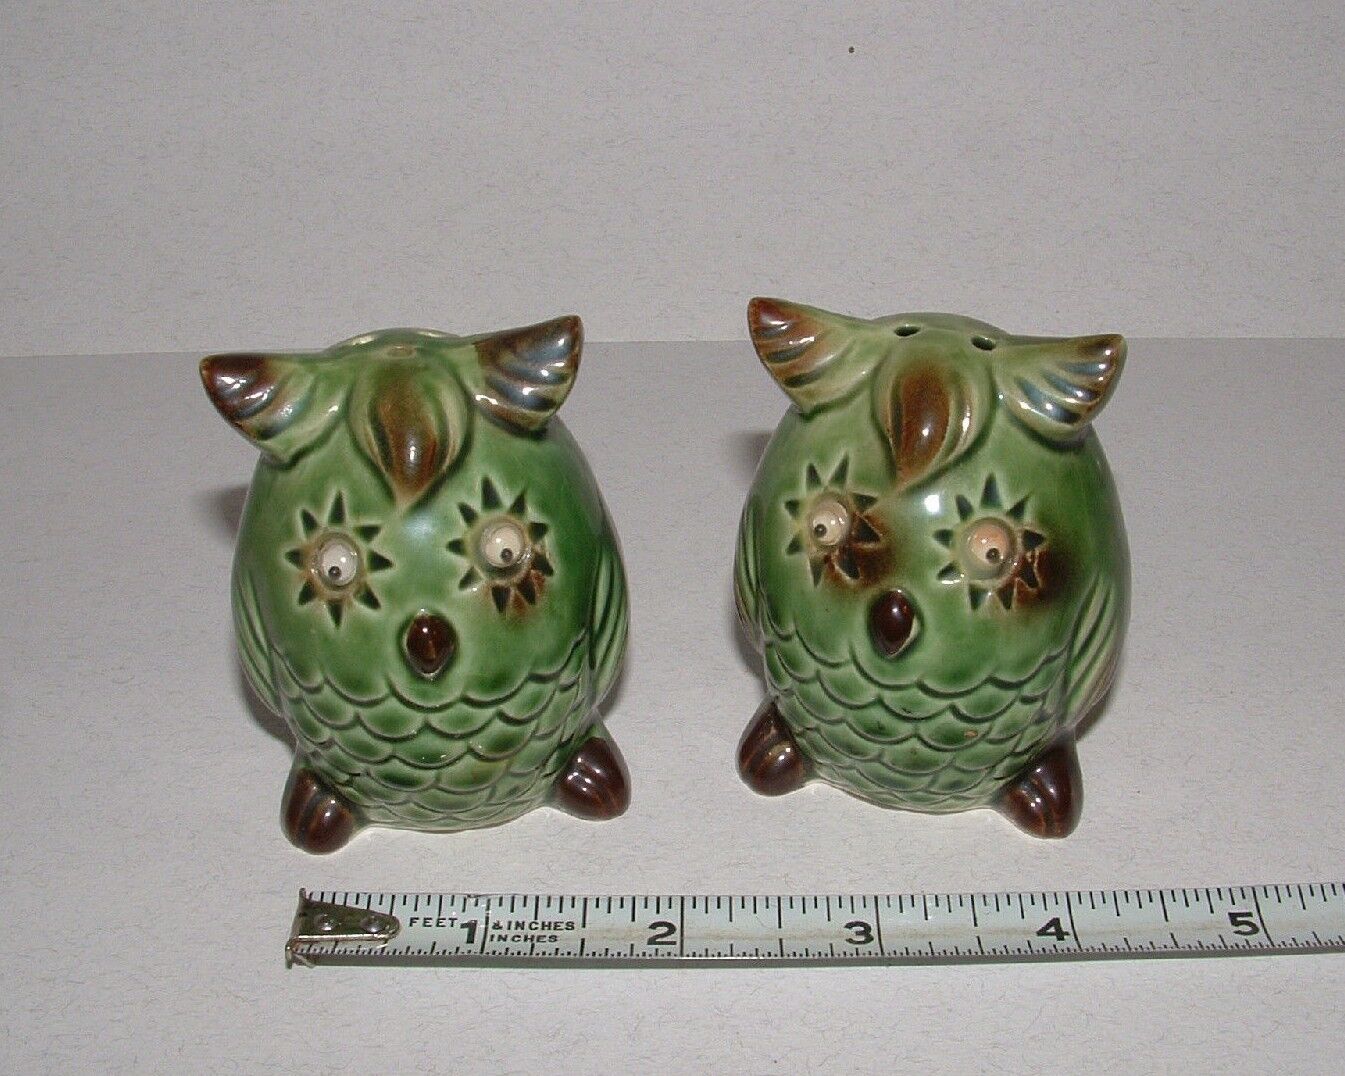 Googly Eyes Owl Salt & Pepper Shakers, Green, Age Unknown, pre-owned